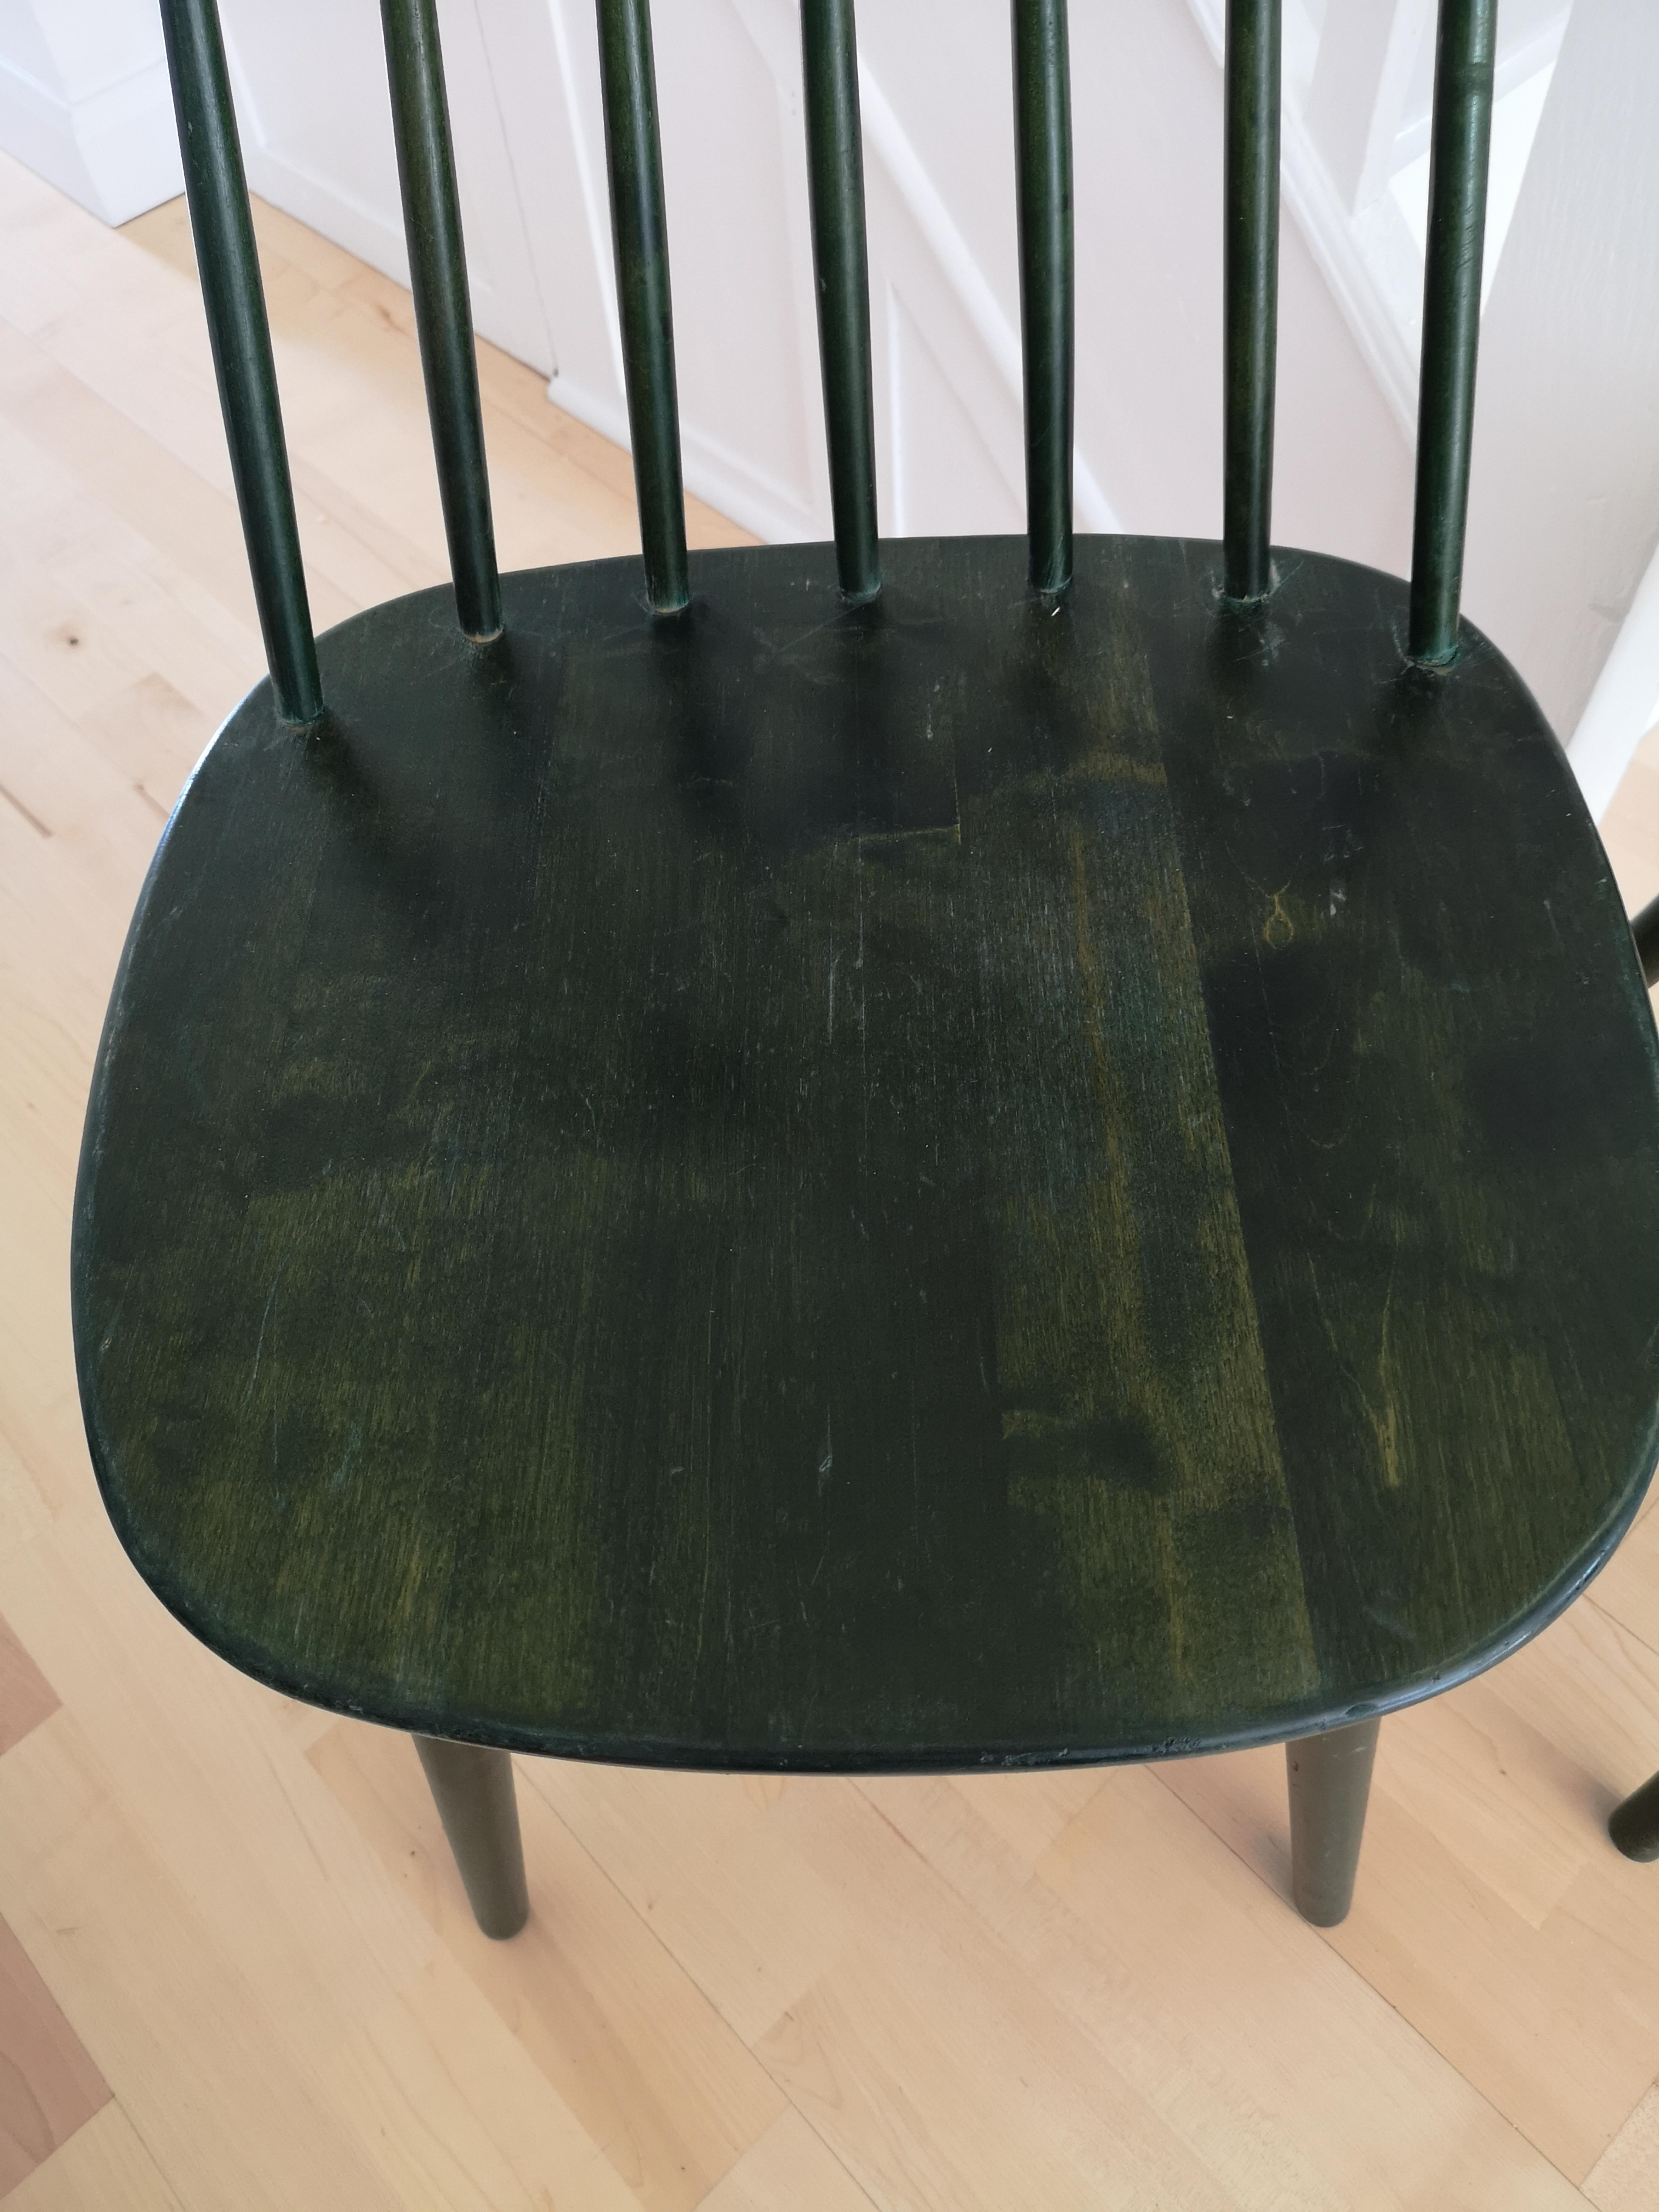 A fabulous set of 4 Swedish midcentury Pinnockio spindle back birch dining chairs designed by Yngve Ekström for Stolab in the 1950s. The chairs have original dark green staining. Lovely grain and finger joint detailing. All chairs have been